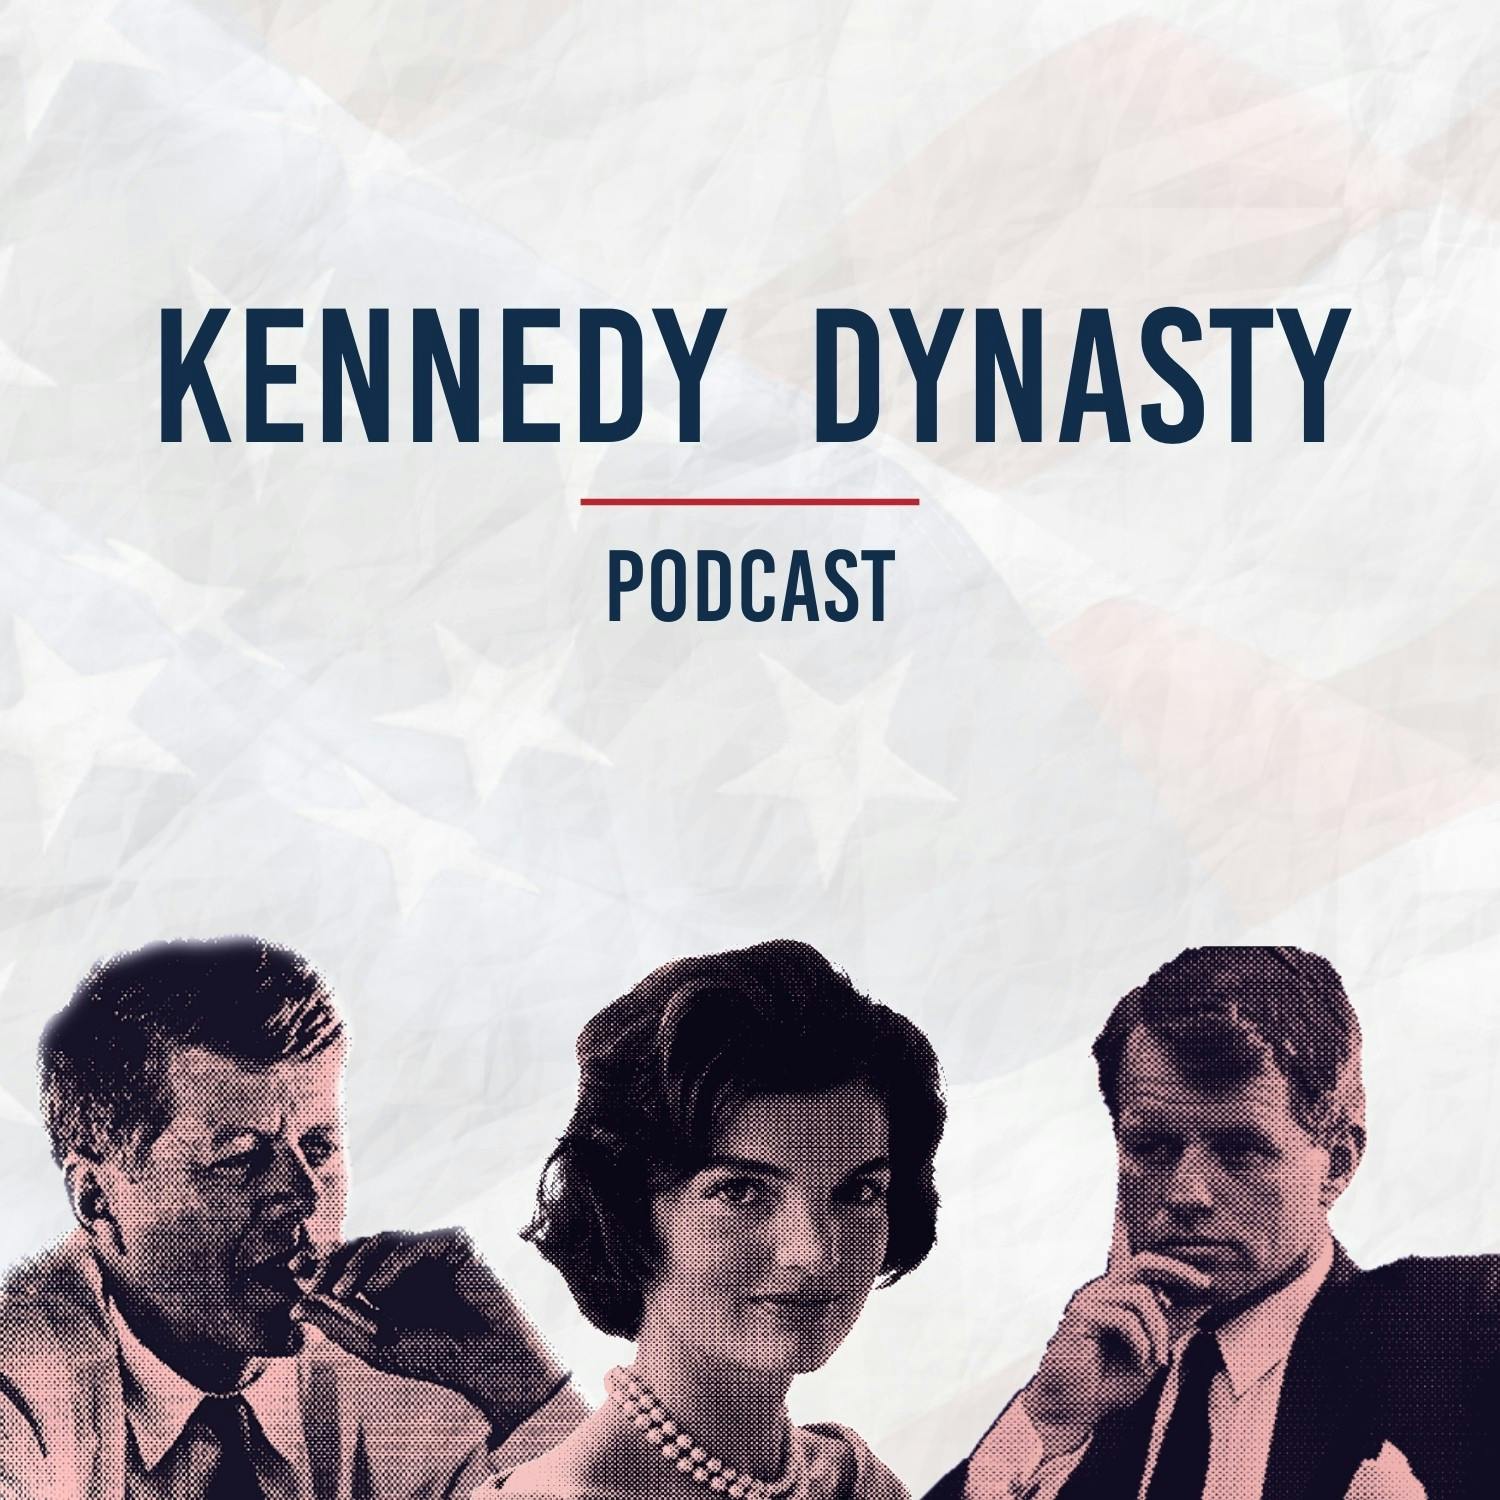 Robert F. Kennedy’s Visit To The Mississippi Delta - Part 2